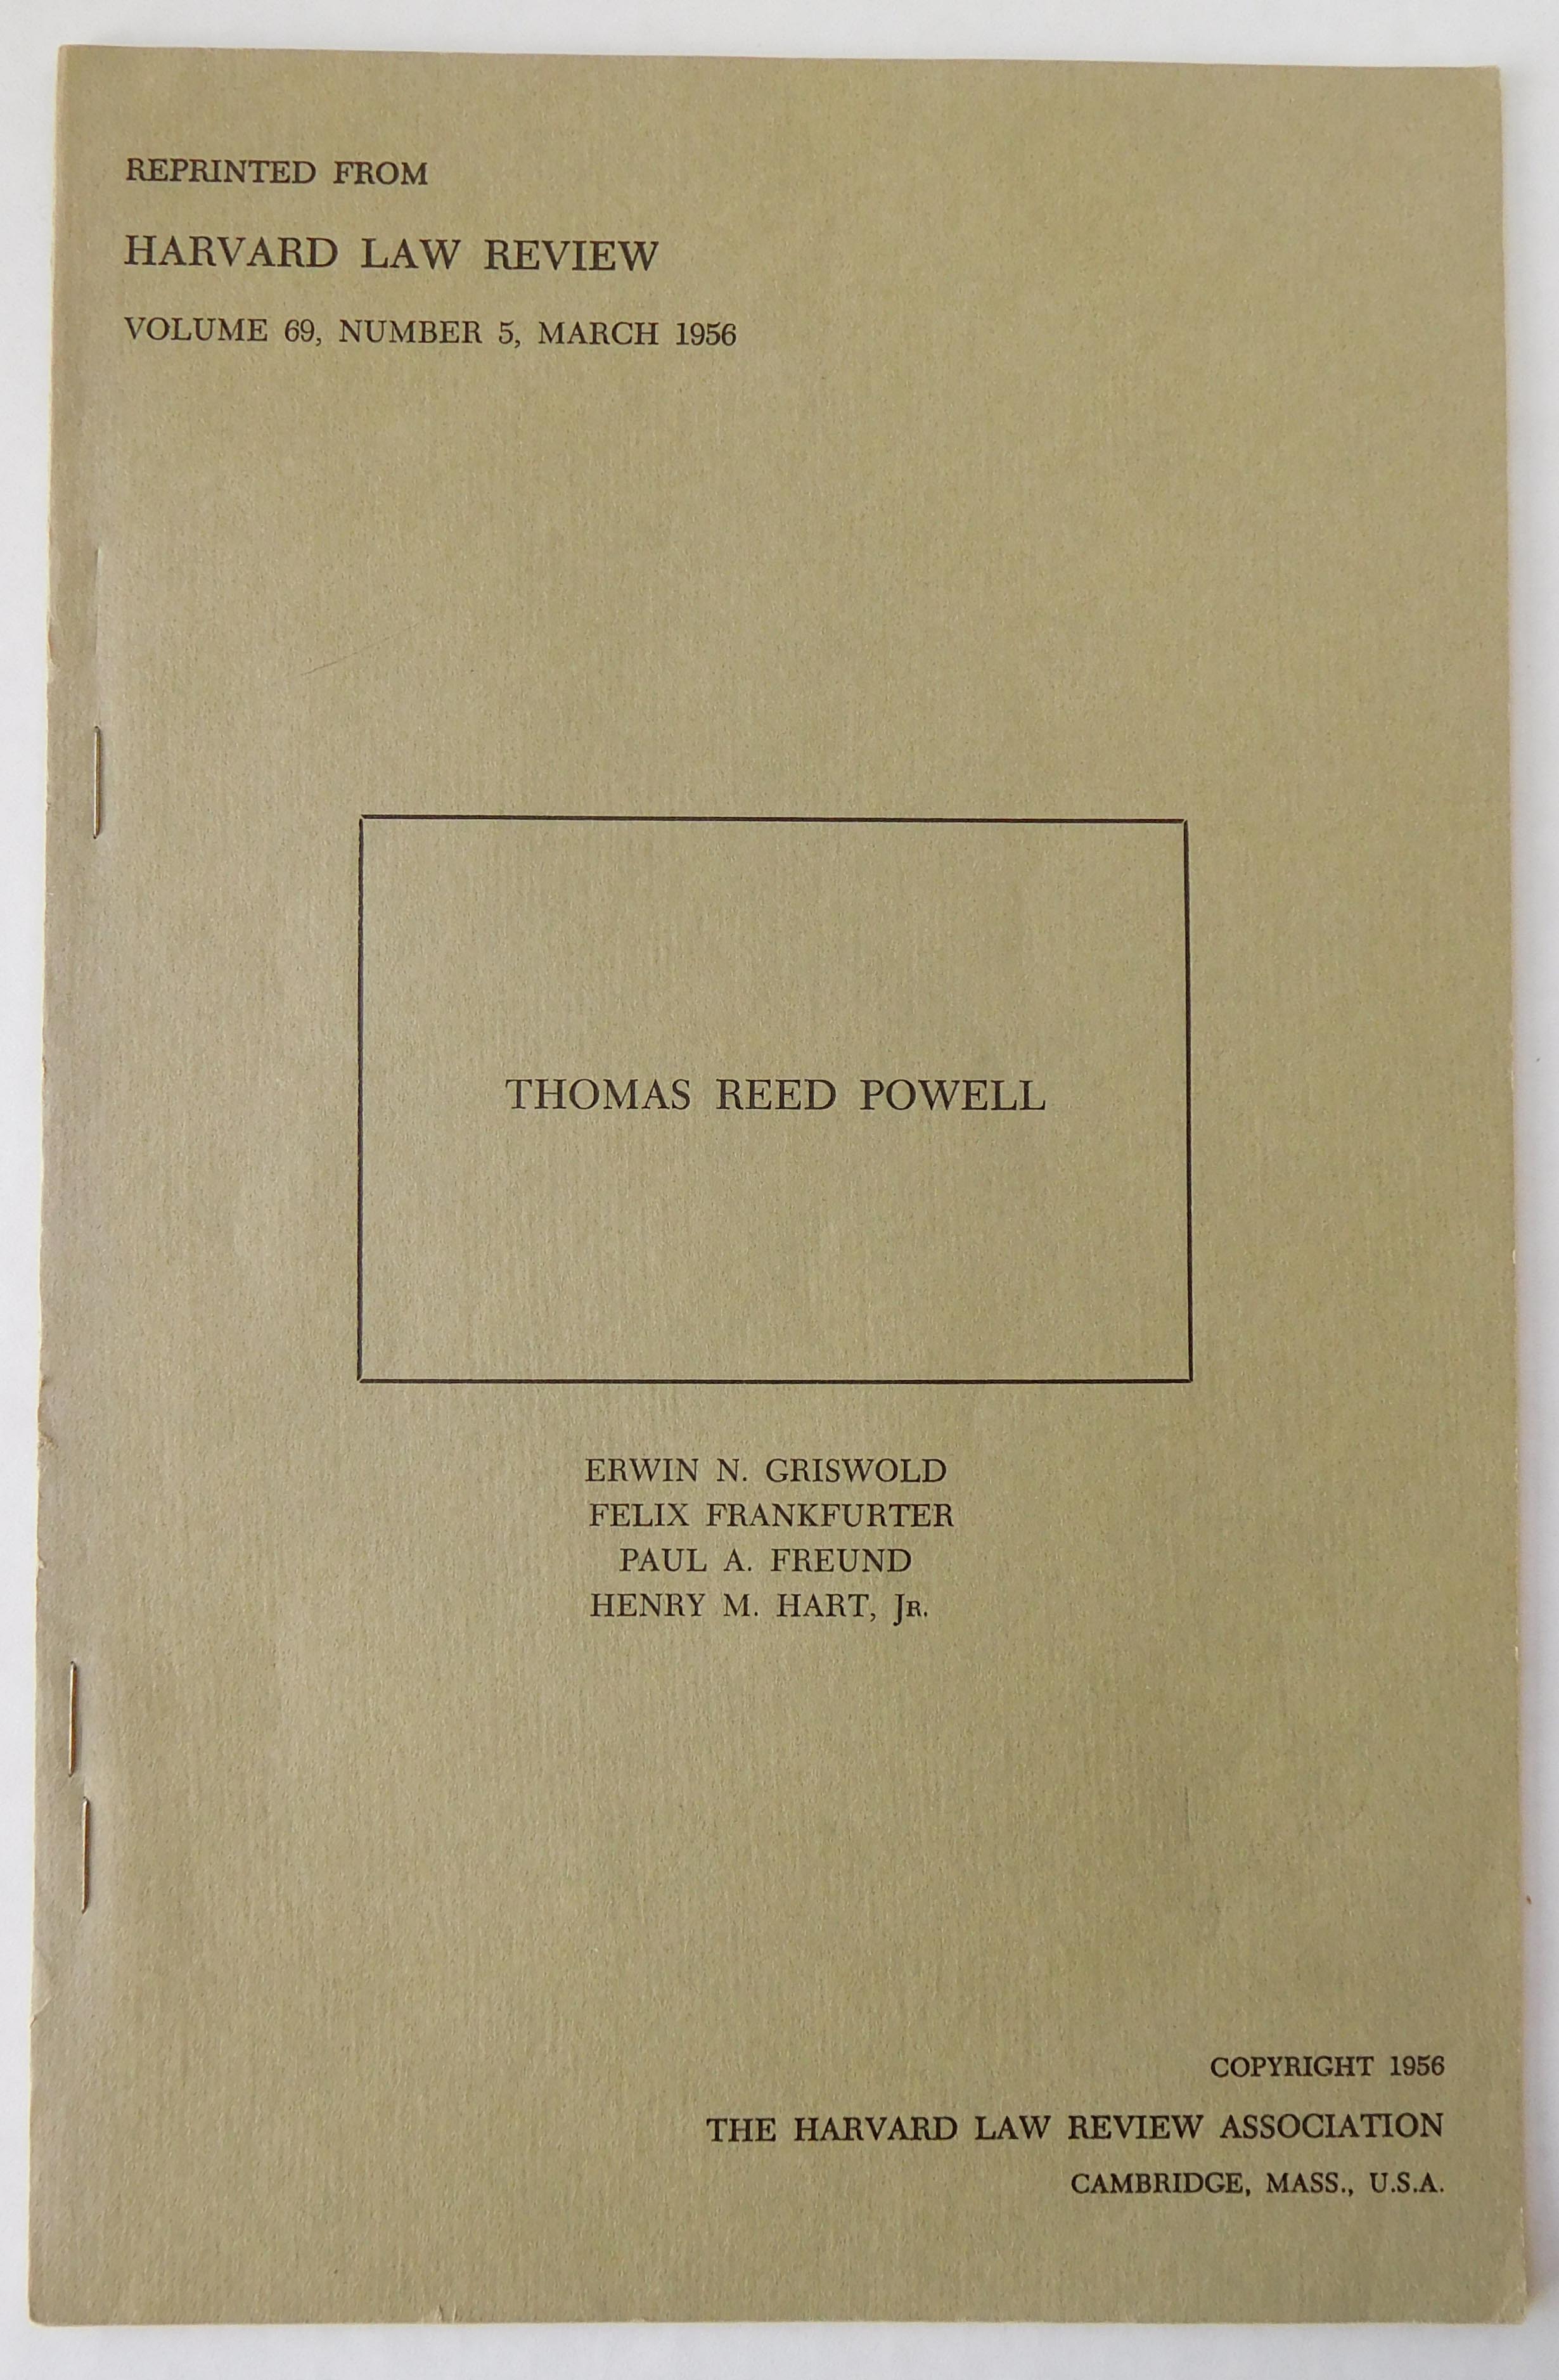 , - Thomas Reed Powell [Four tributes-- by Erwin N. Griswold, Felix Frankfurter, Paul A. Freund, and Henry M. Hart, Jr.--with the full page frontispiece of Professor Powell reproducing the painting of him seated in professorial robes with papers]